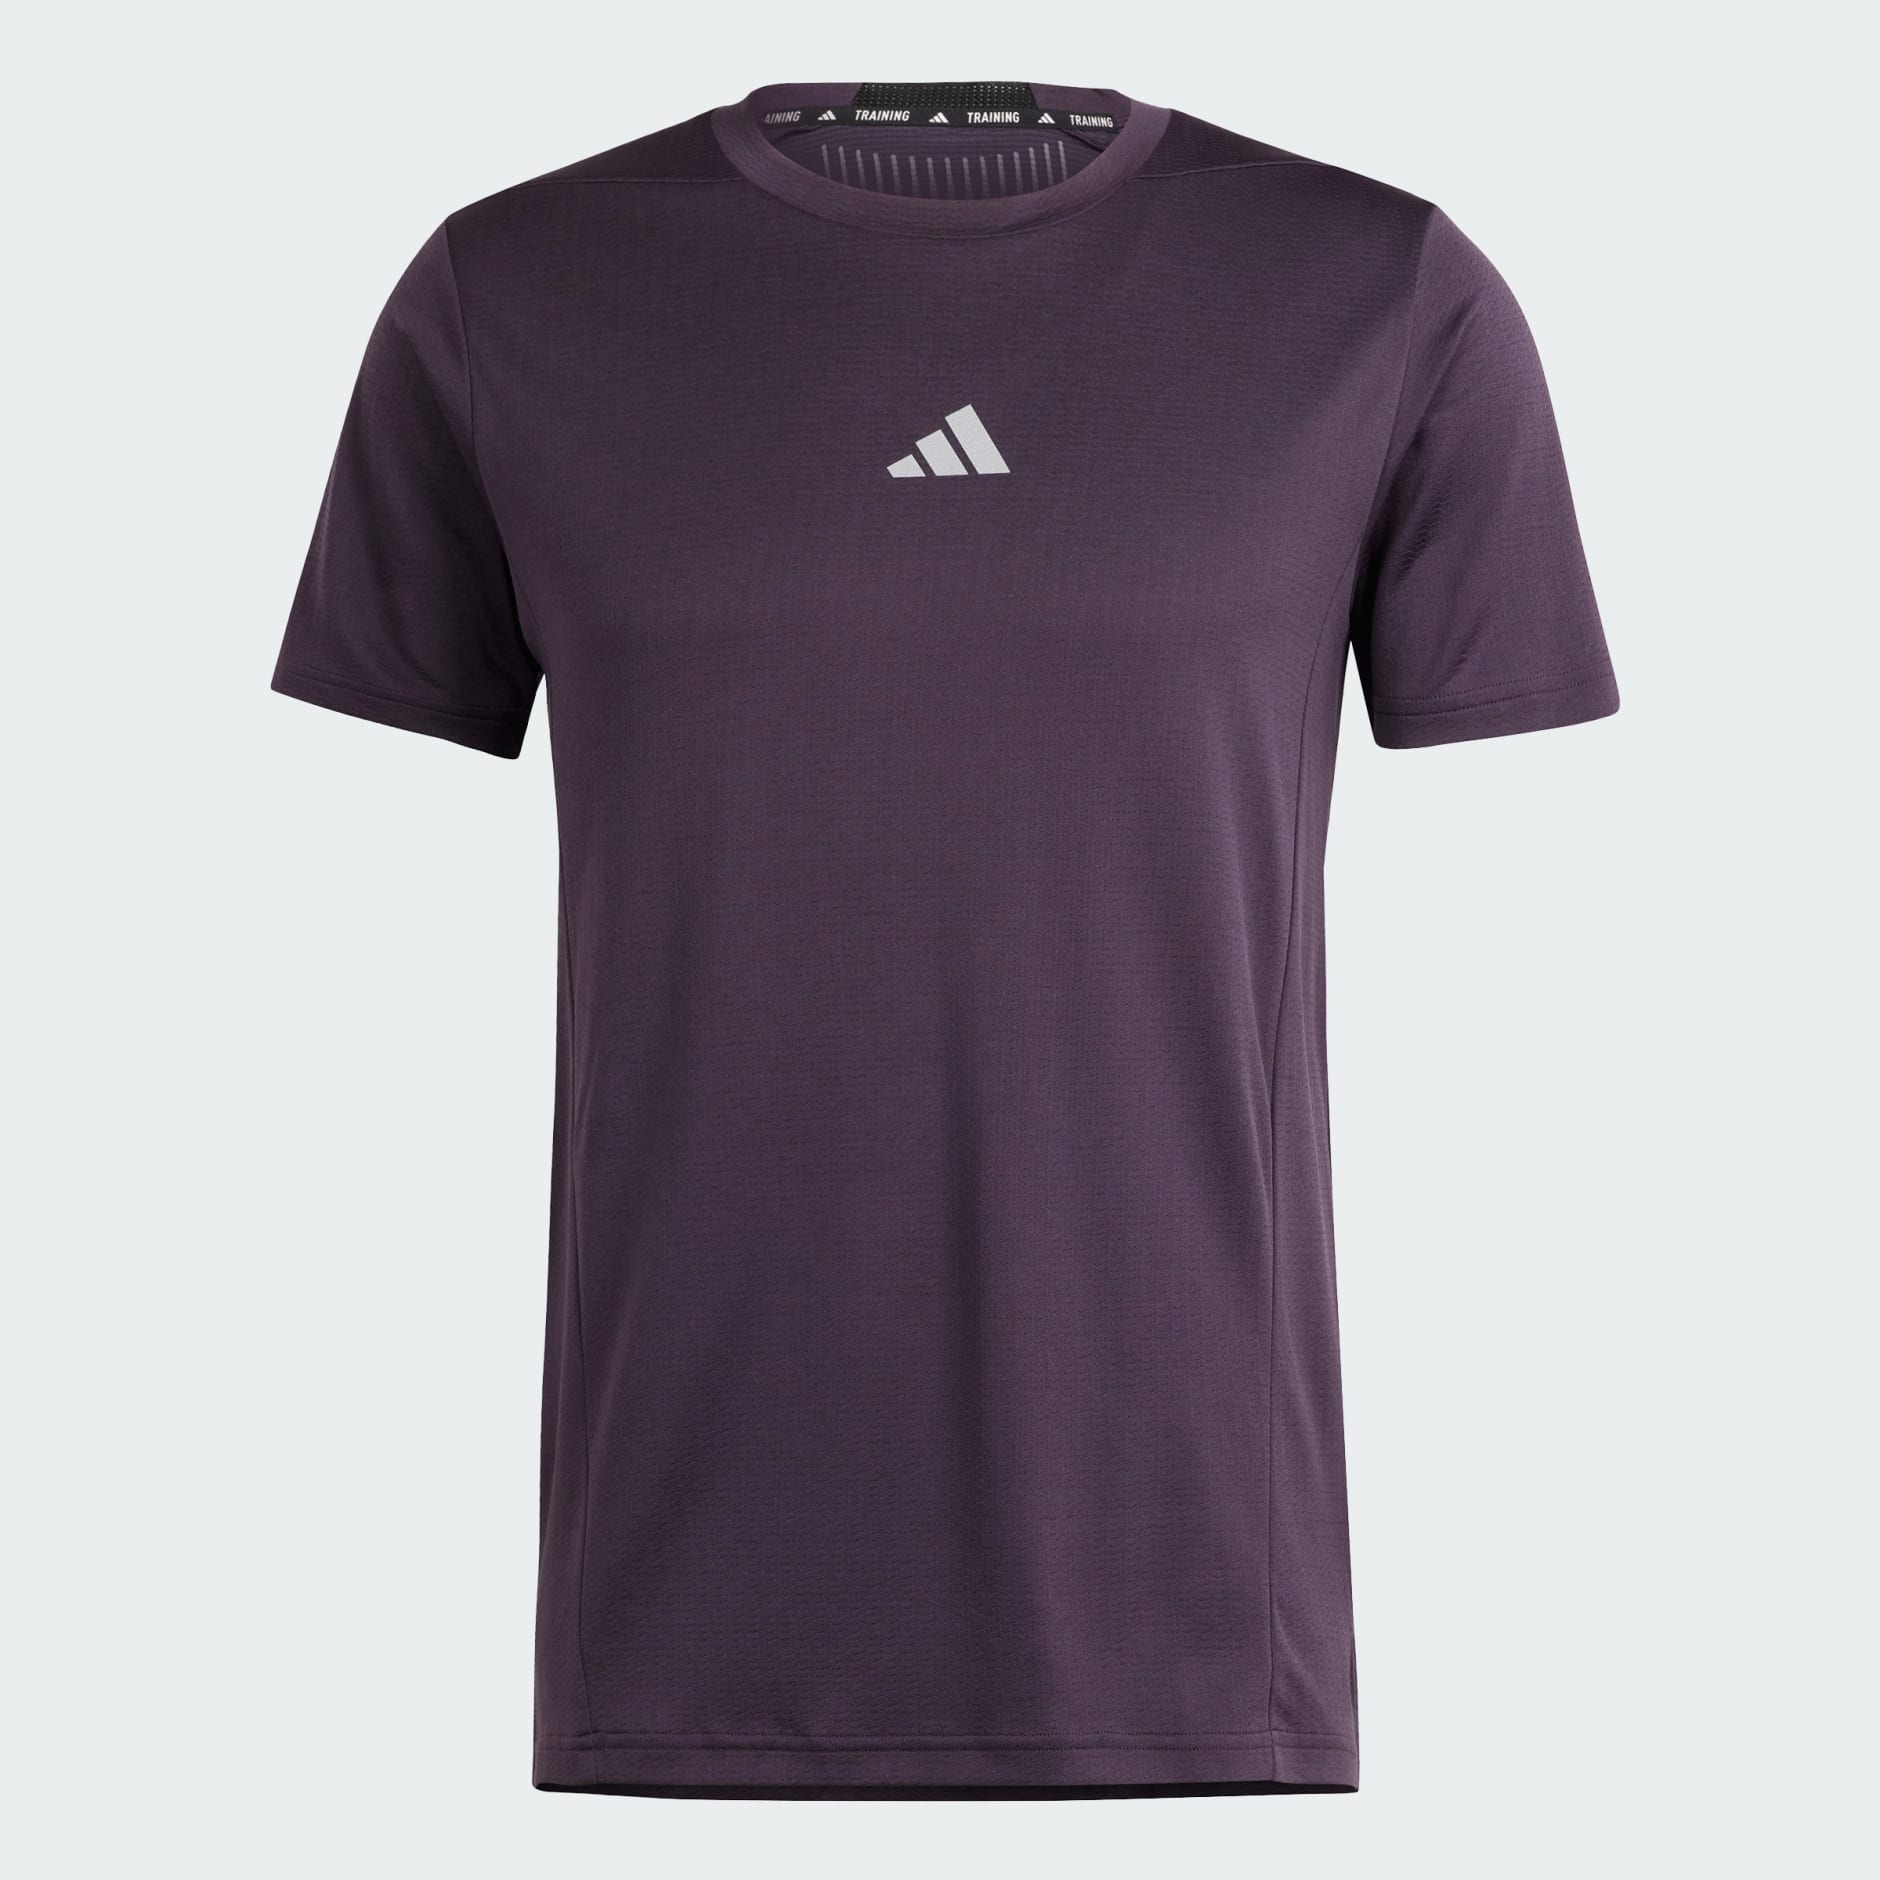 adidas Designed for Training HIIT Workout HEAT.RDY Tee - Purple ...